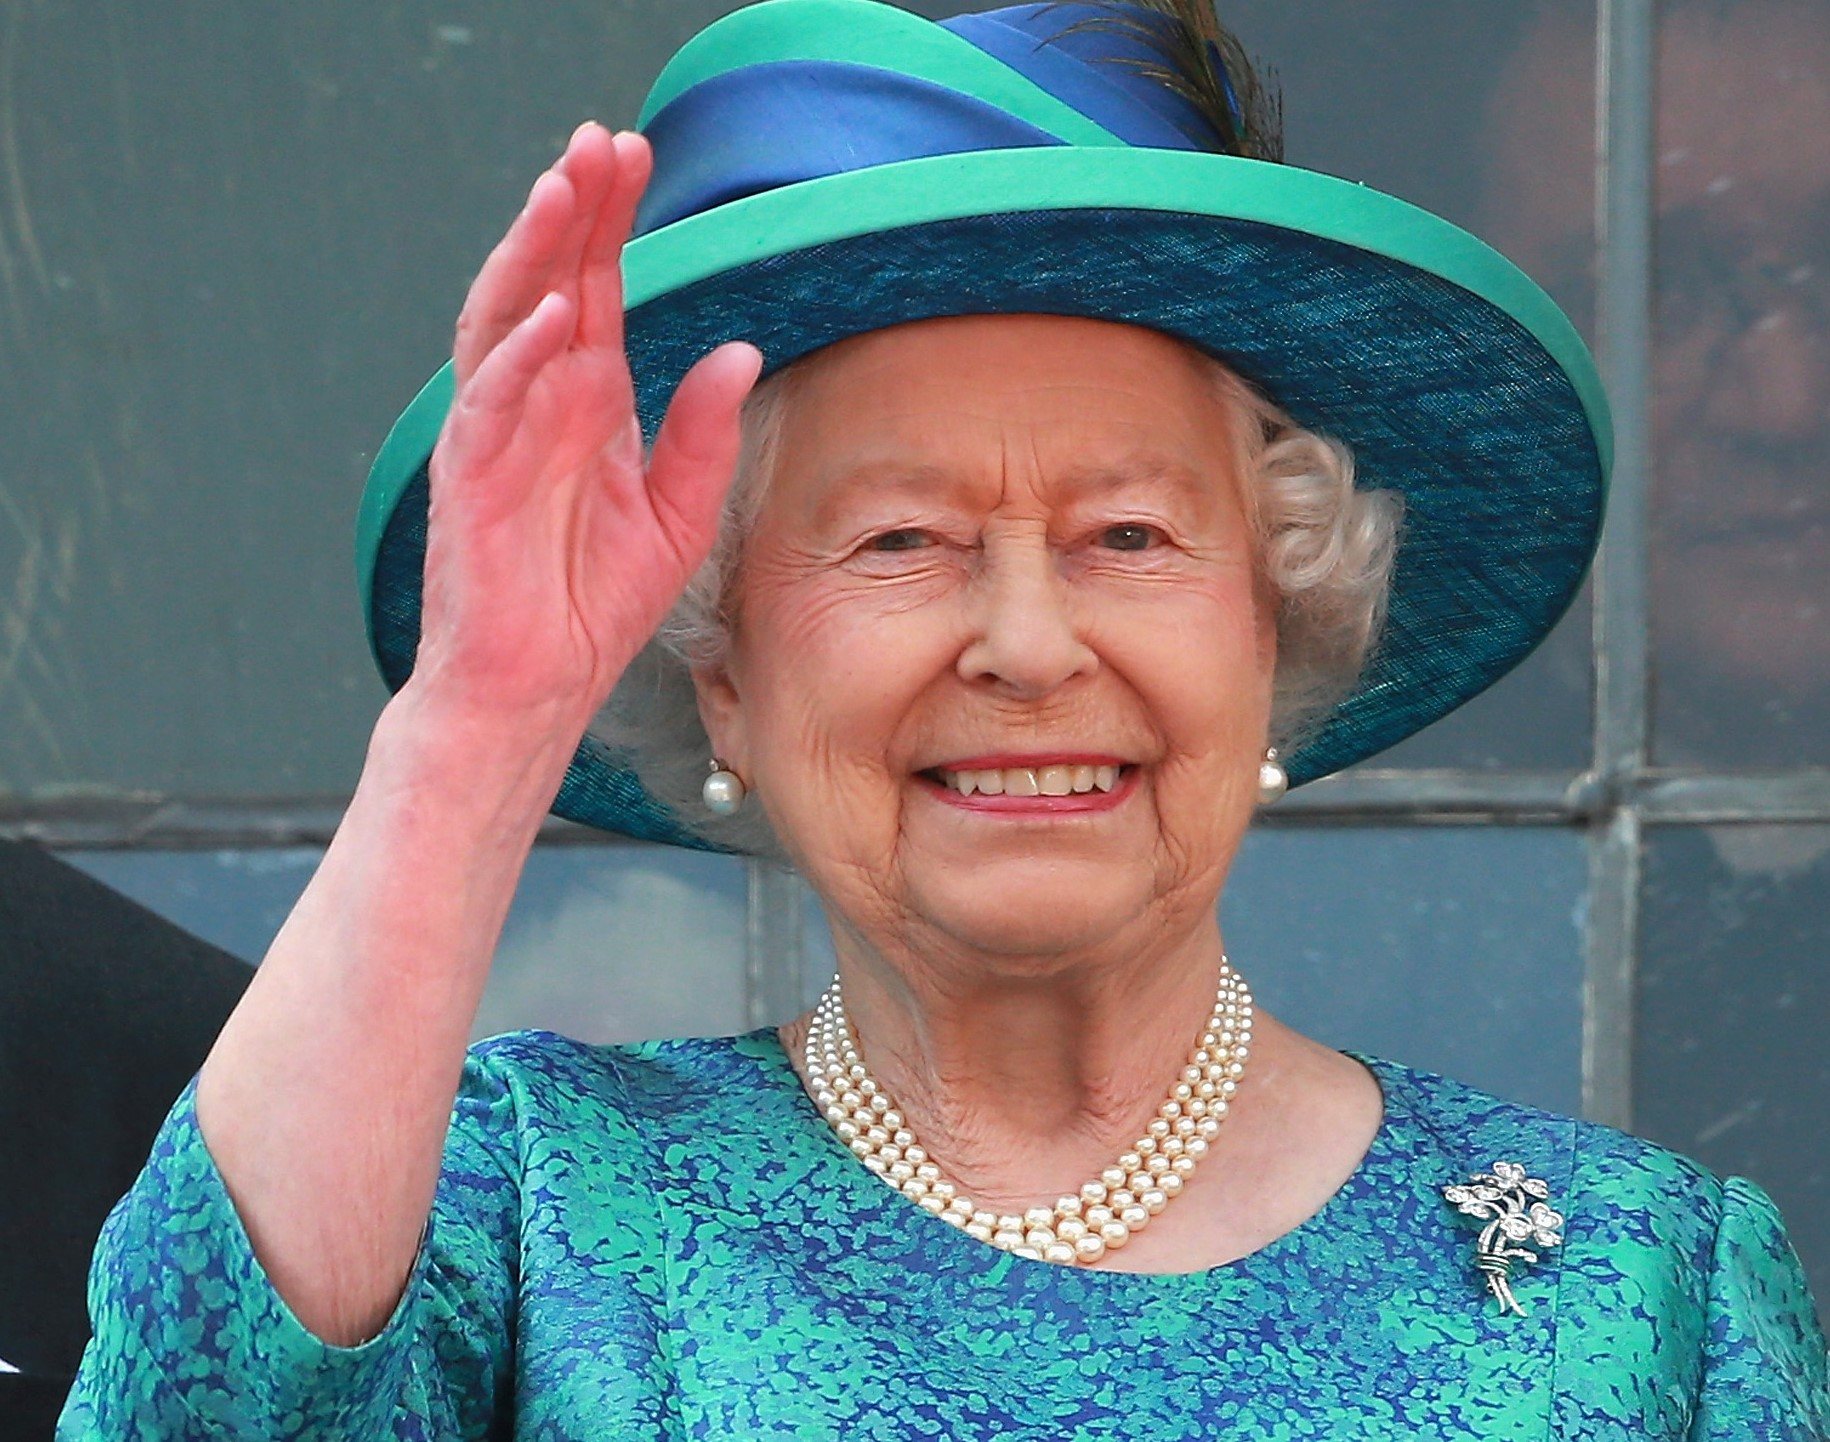 Cops search for person who leaked Queen’s funeral plan